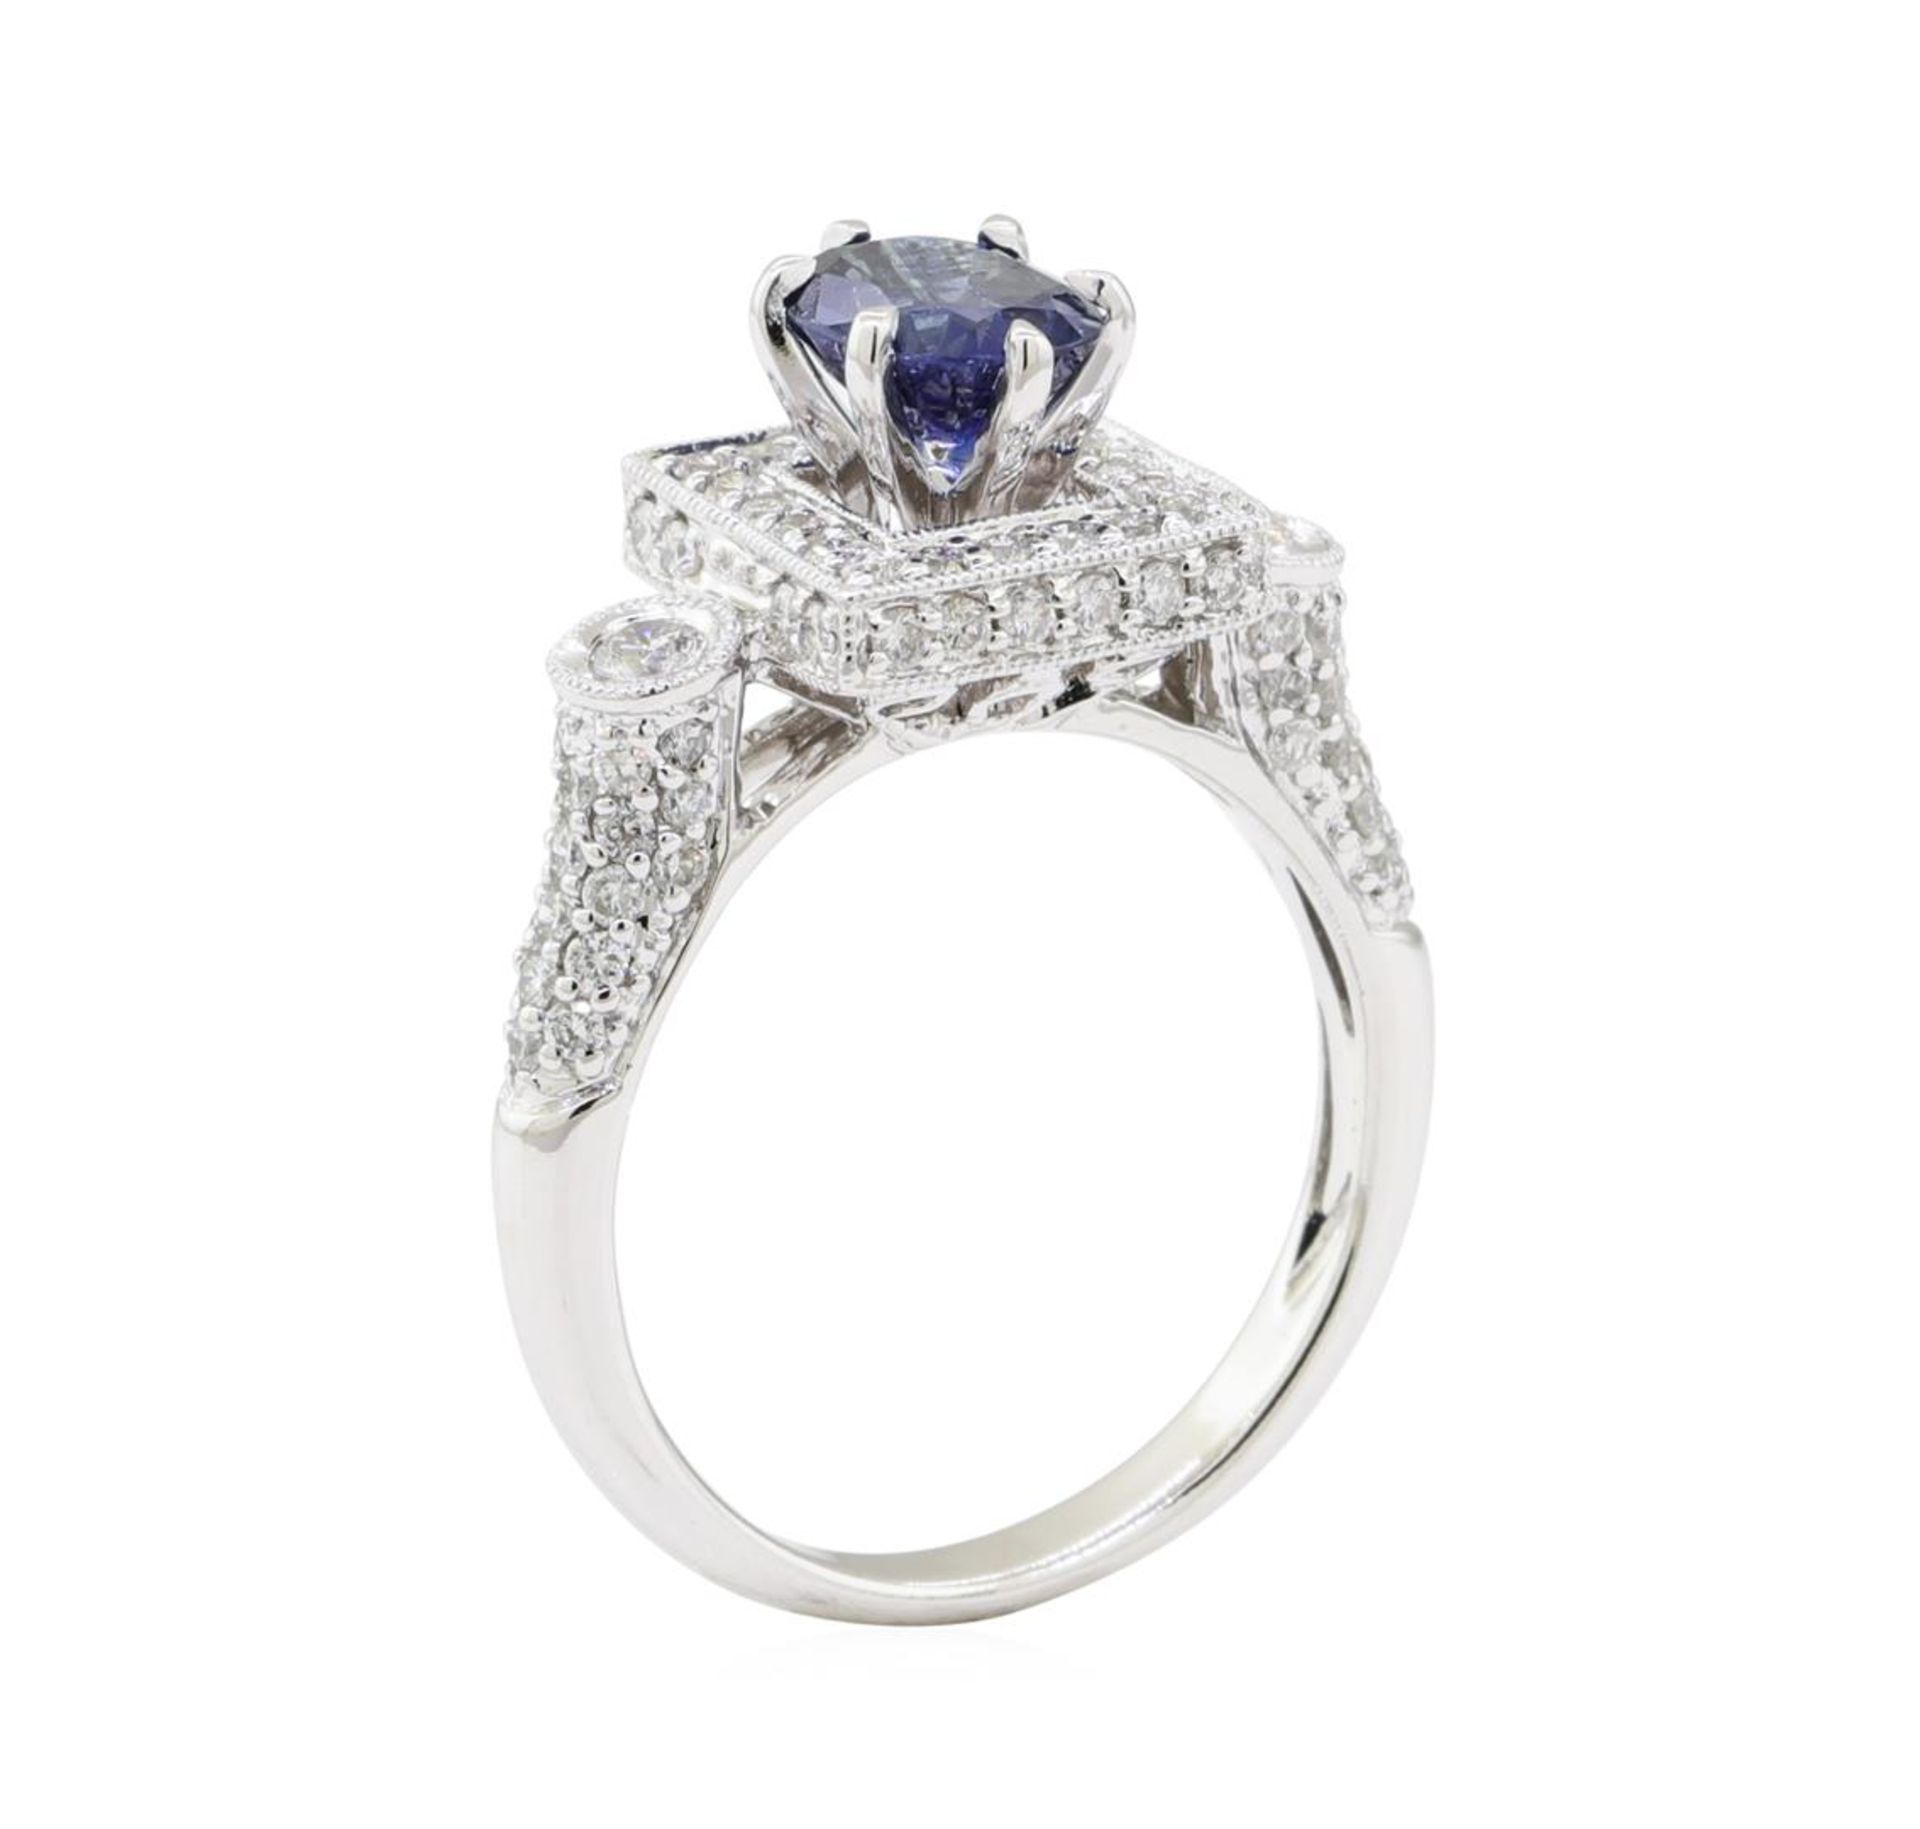 2.09 ctw Sapphire and Diamond Ring - 18KT White Gold - Image 4 of 5